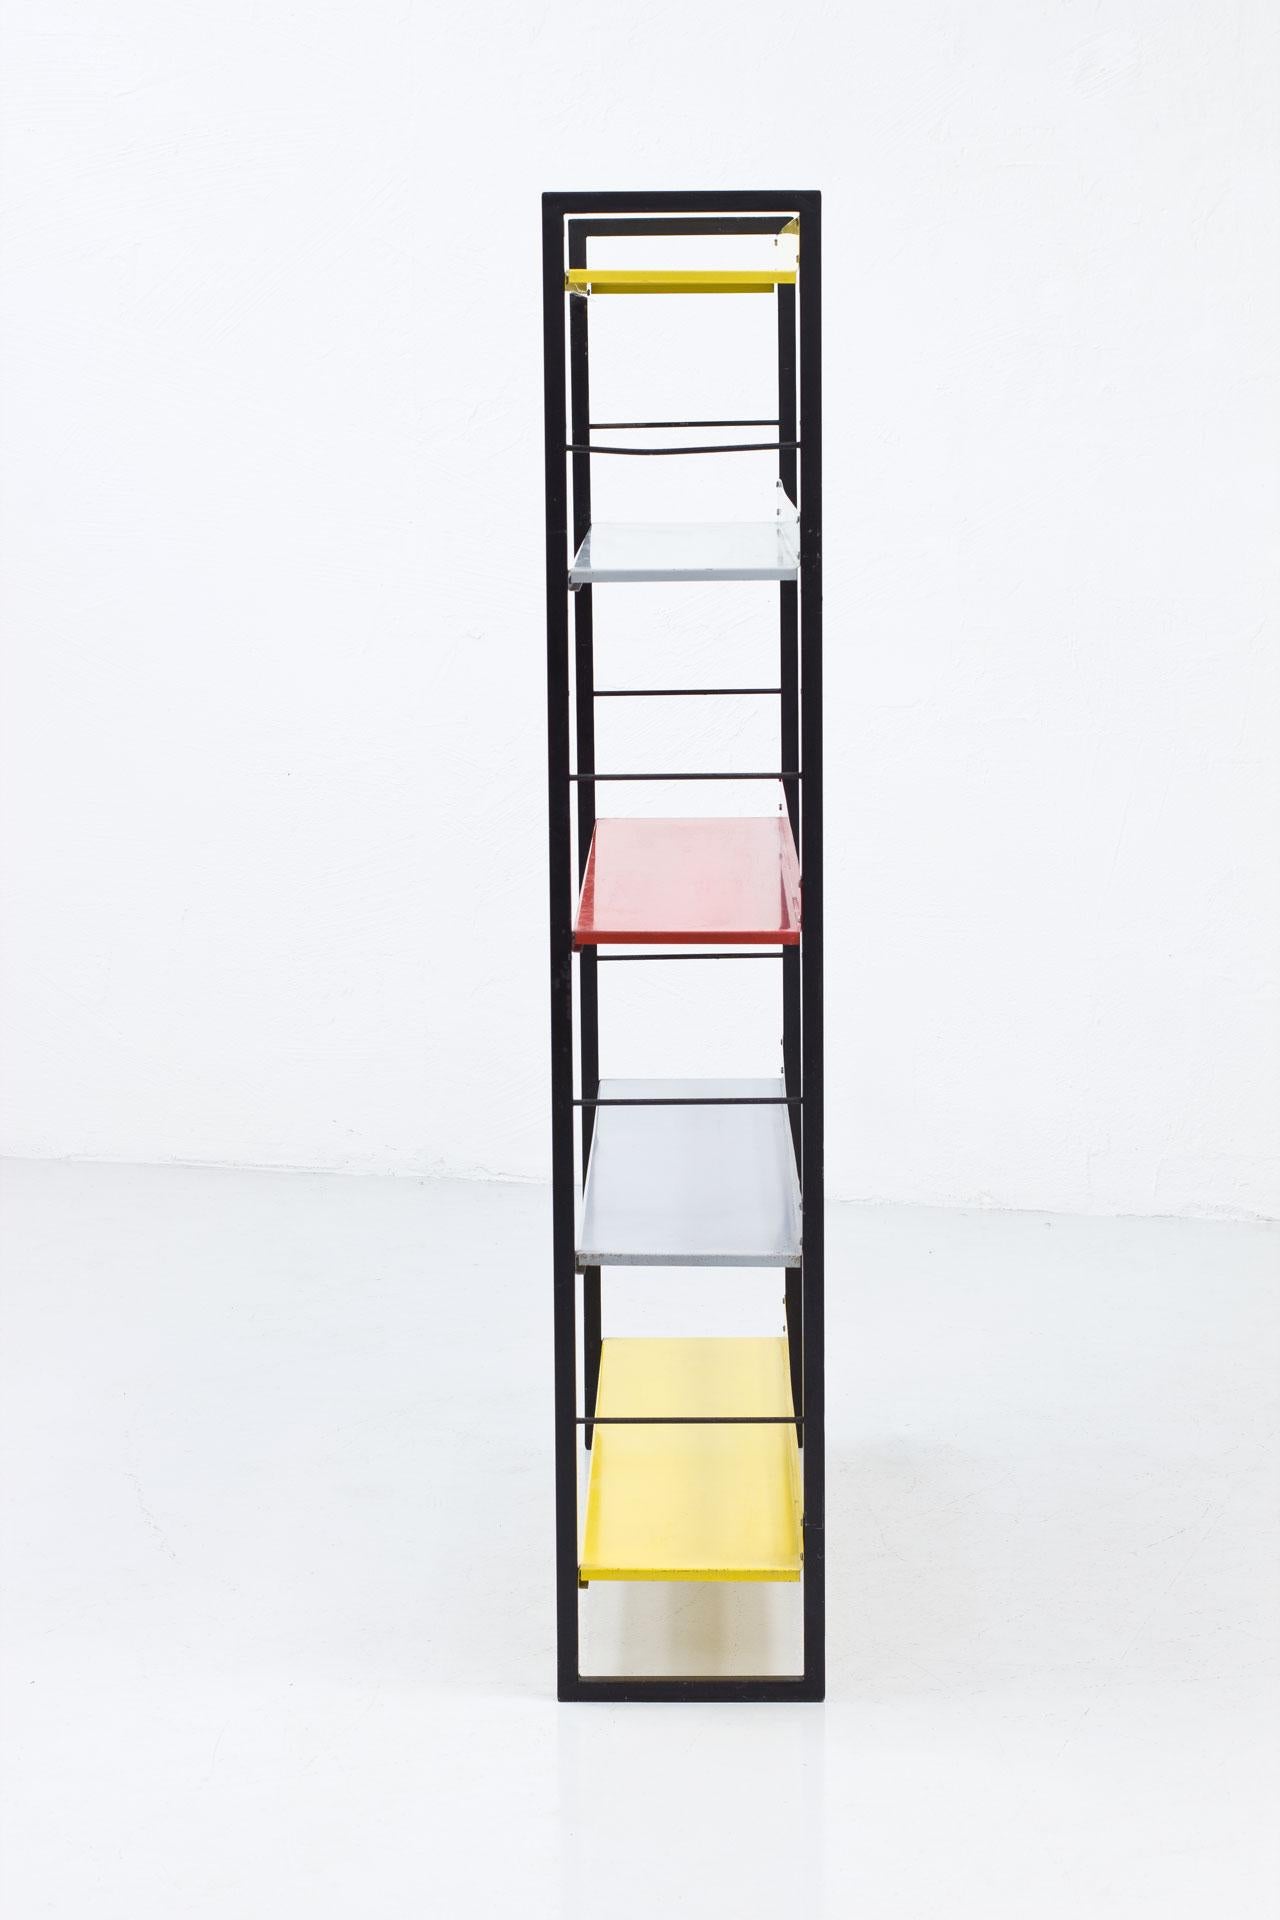 Bookcase, shelving system designed by Adriaan Dekker, 
manufactured by Tomado in the Netherlands during the late 1950s. 
Black metal risers with yellow, red & grey metal shelves.